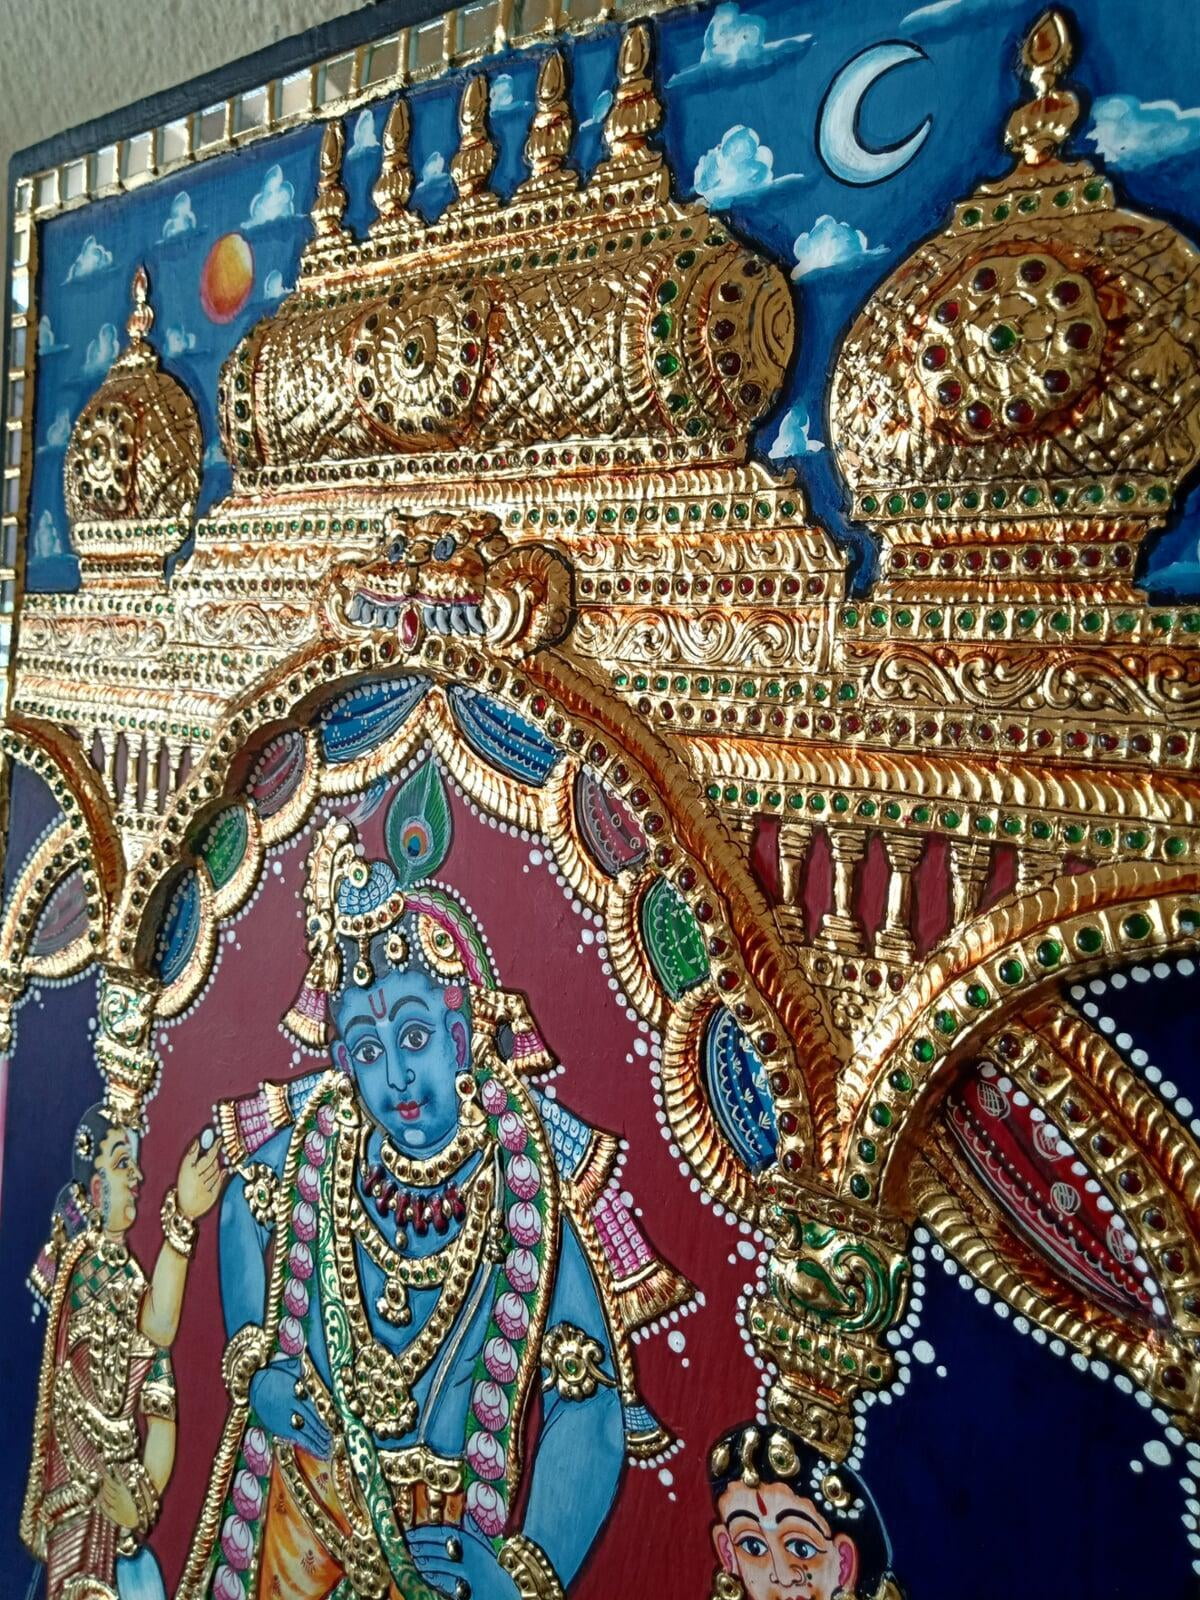 What is the unique feature of Tanjore paintings?